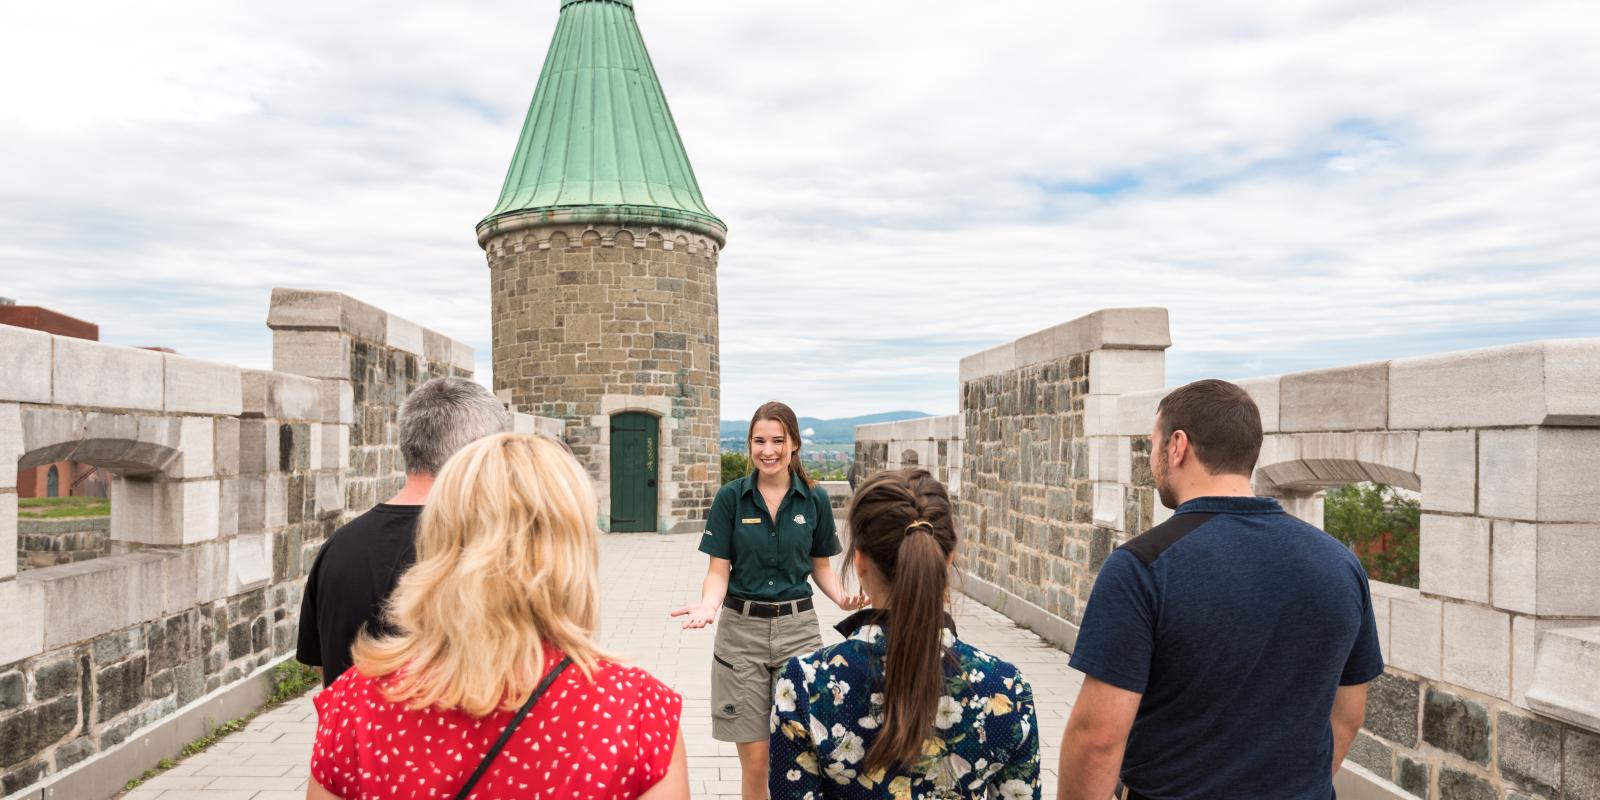 A group of visitors take part in a guided walking tour of the Fortifications of Québec National Historic Site.